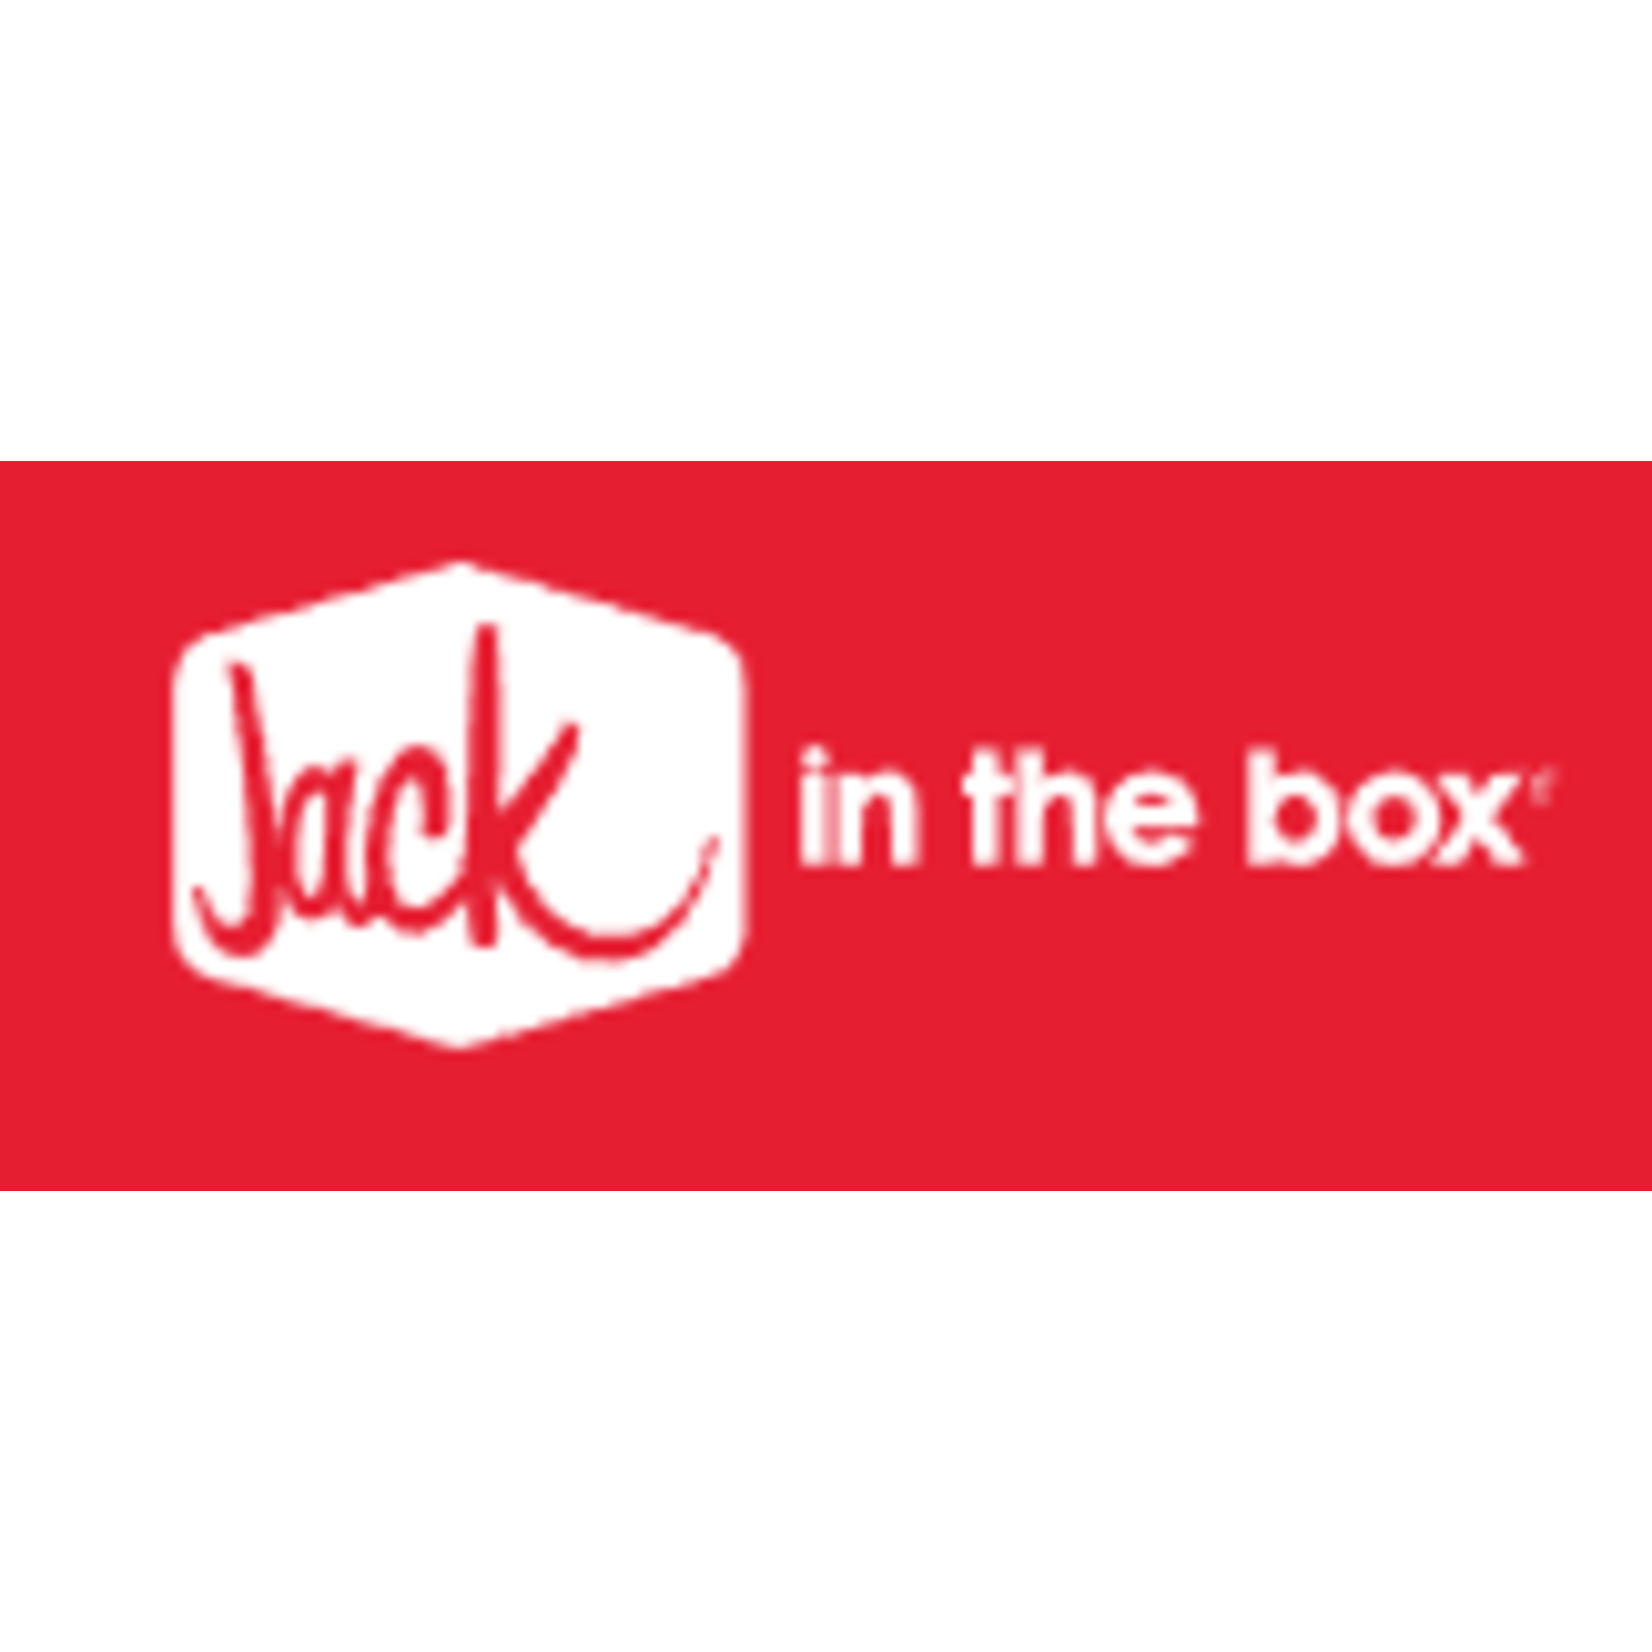 Jack in the Box Jack in the Box - Sandhill Dr & Old Mill Rd $13 - Sourdough Jack Combo